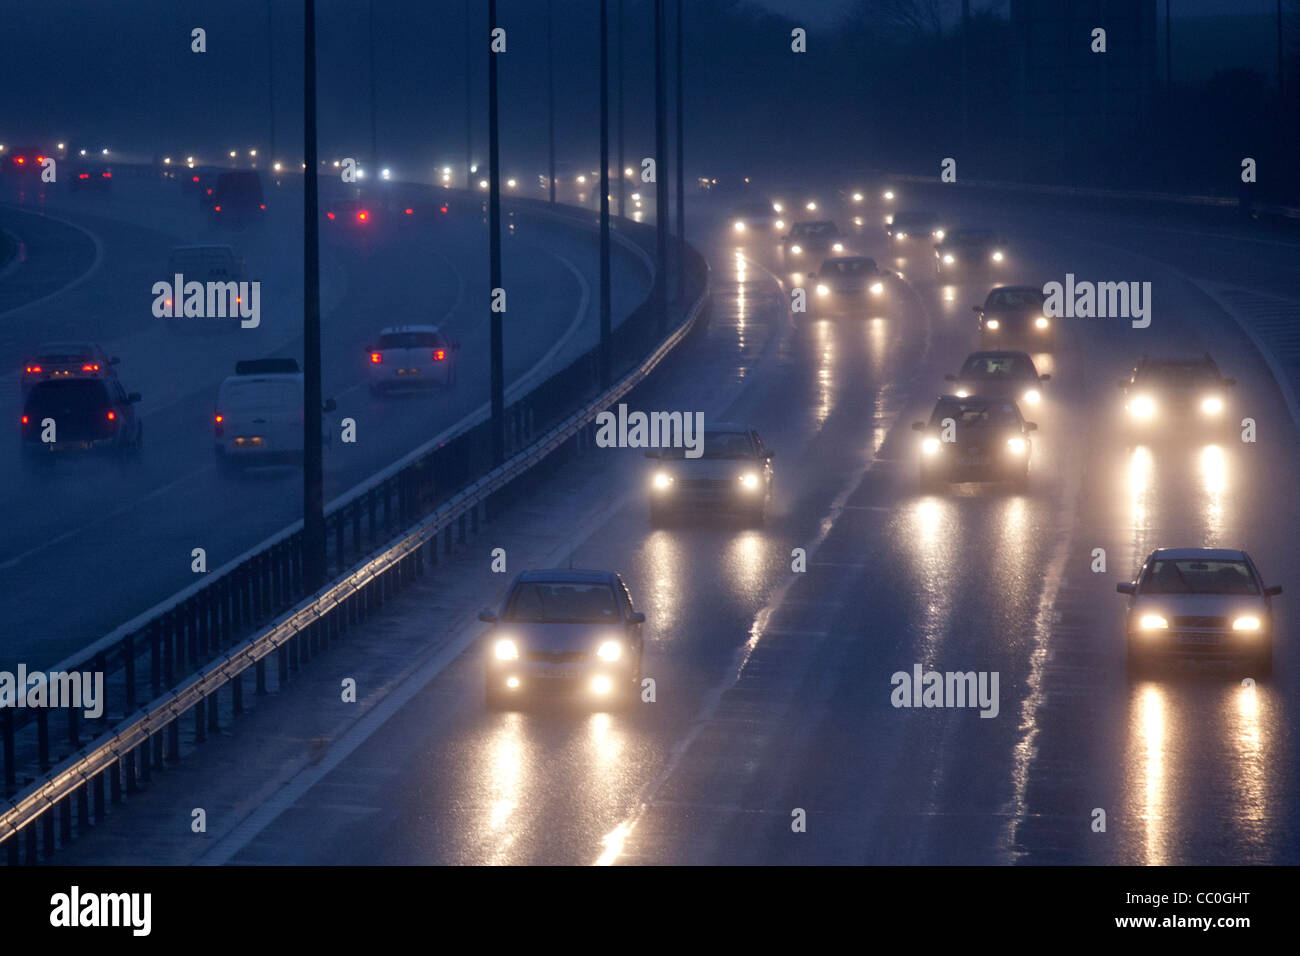 Cars and traffic on a wet raining evening on uk motorway.Driving in dangerous winter conditions. Stock Photo